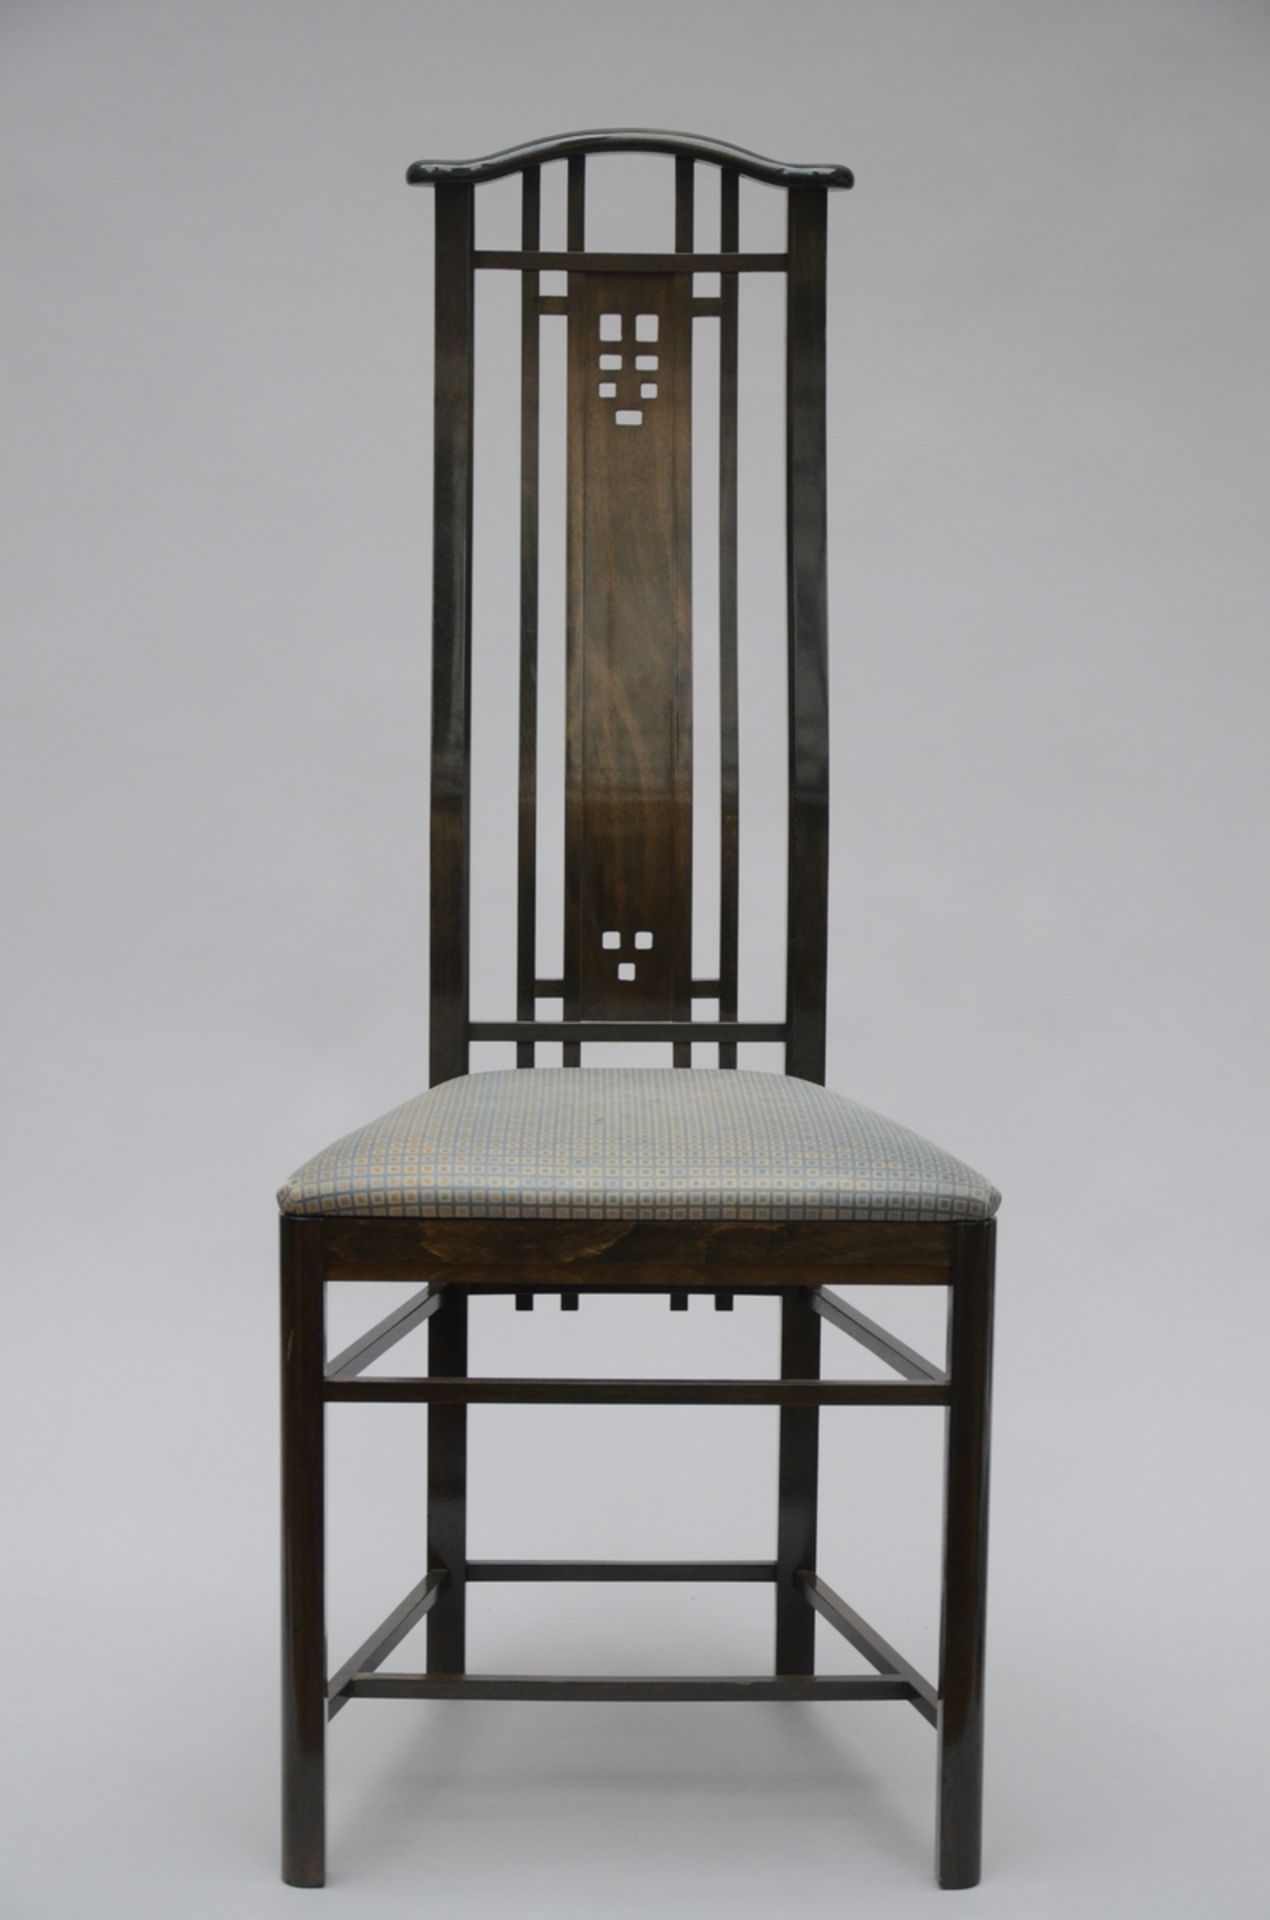 Set of 6 chairs and a round table by Umberto Asagno for Giorgetti (dia 140 cm) - Image 2 of 3